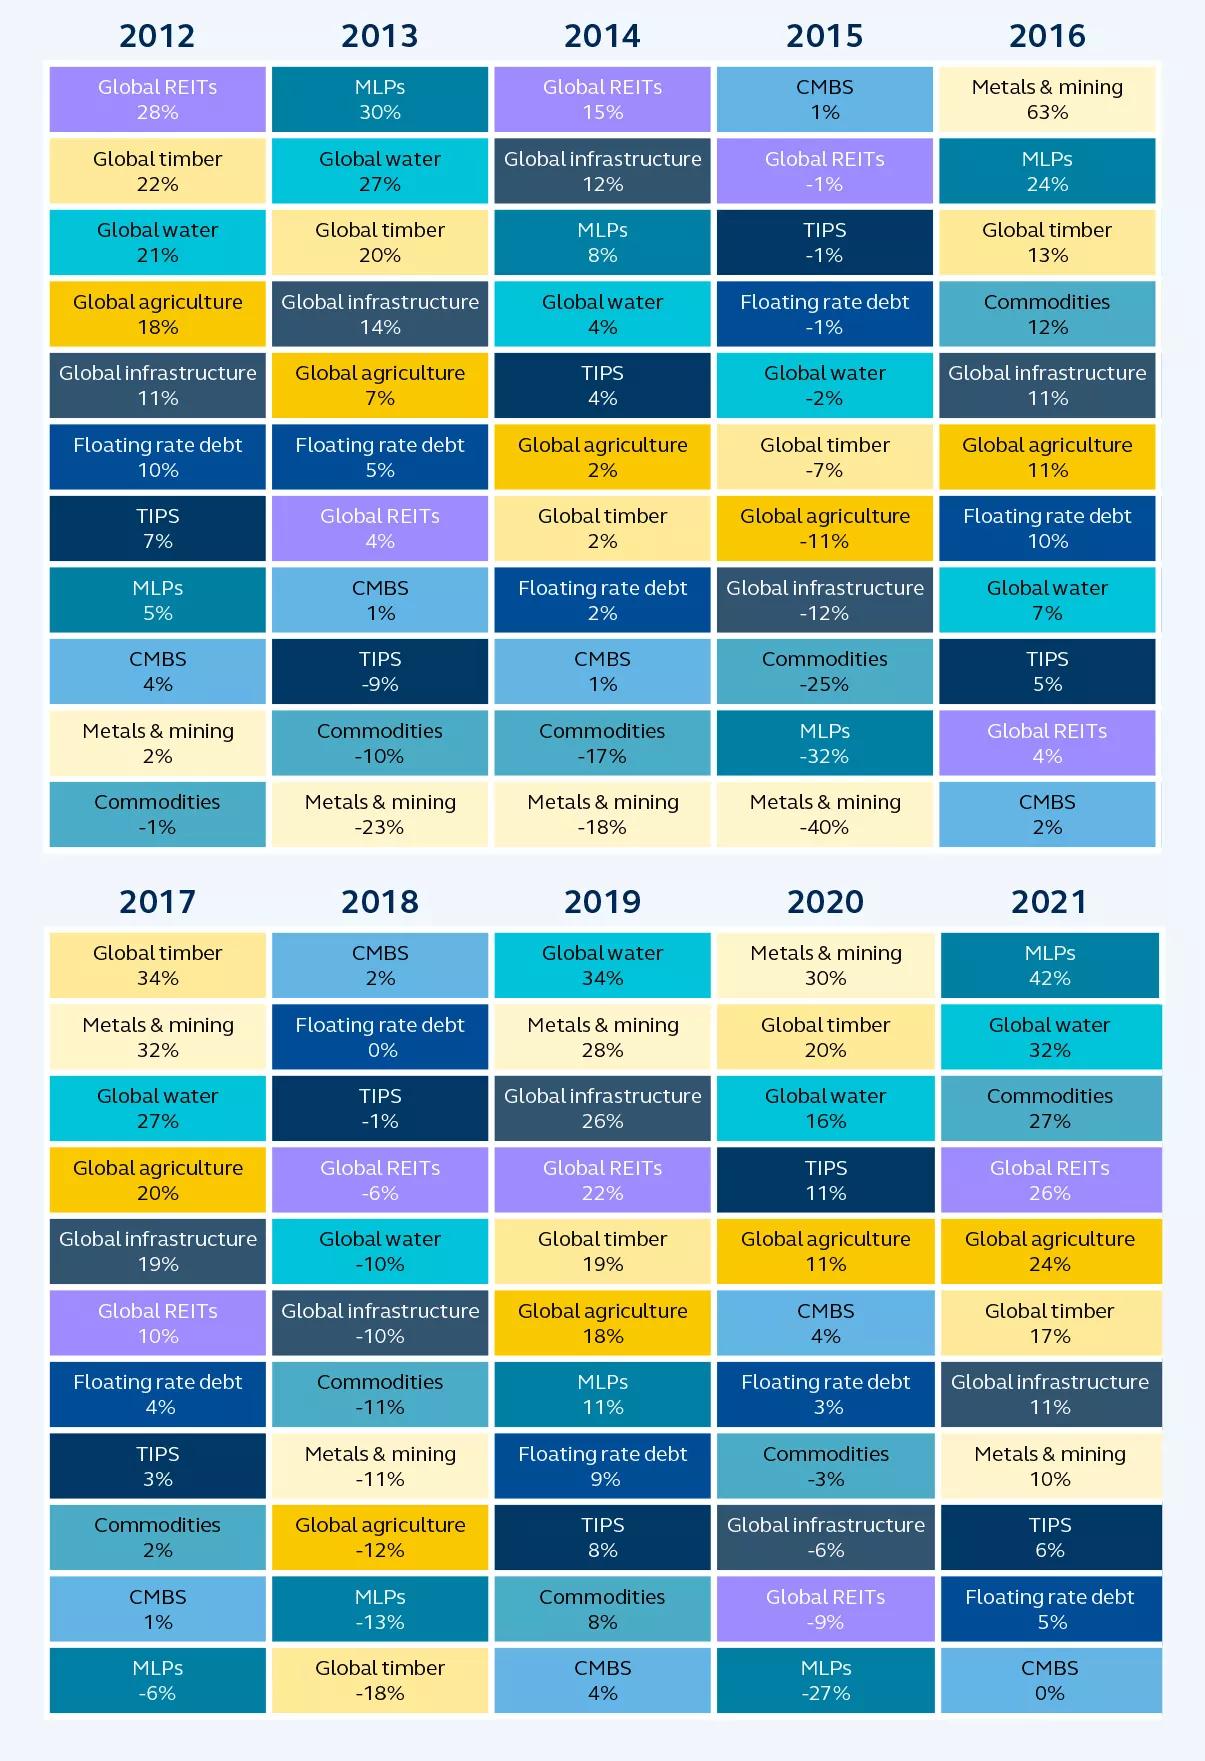 Table displaying calendar year asset class returns from 2012 to 2021